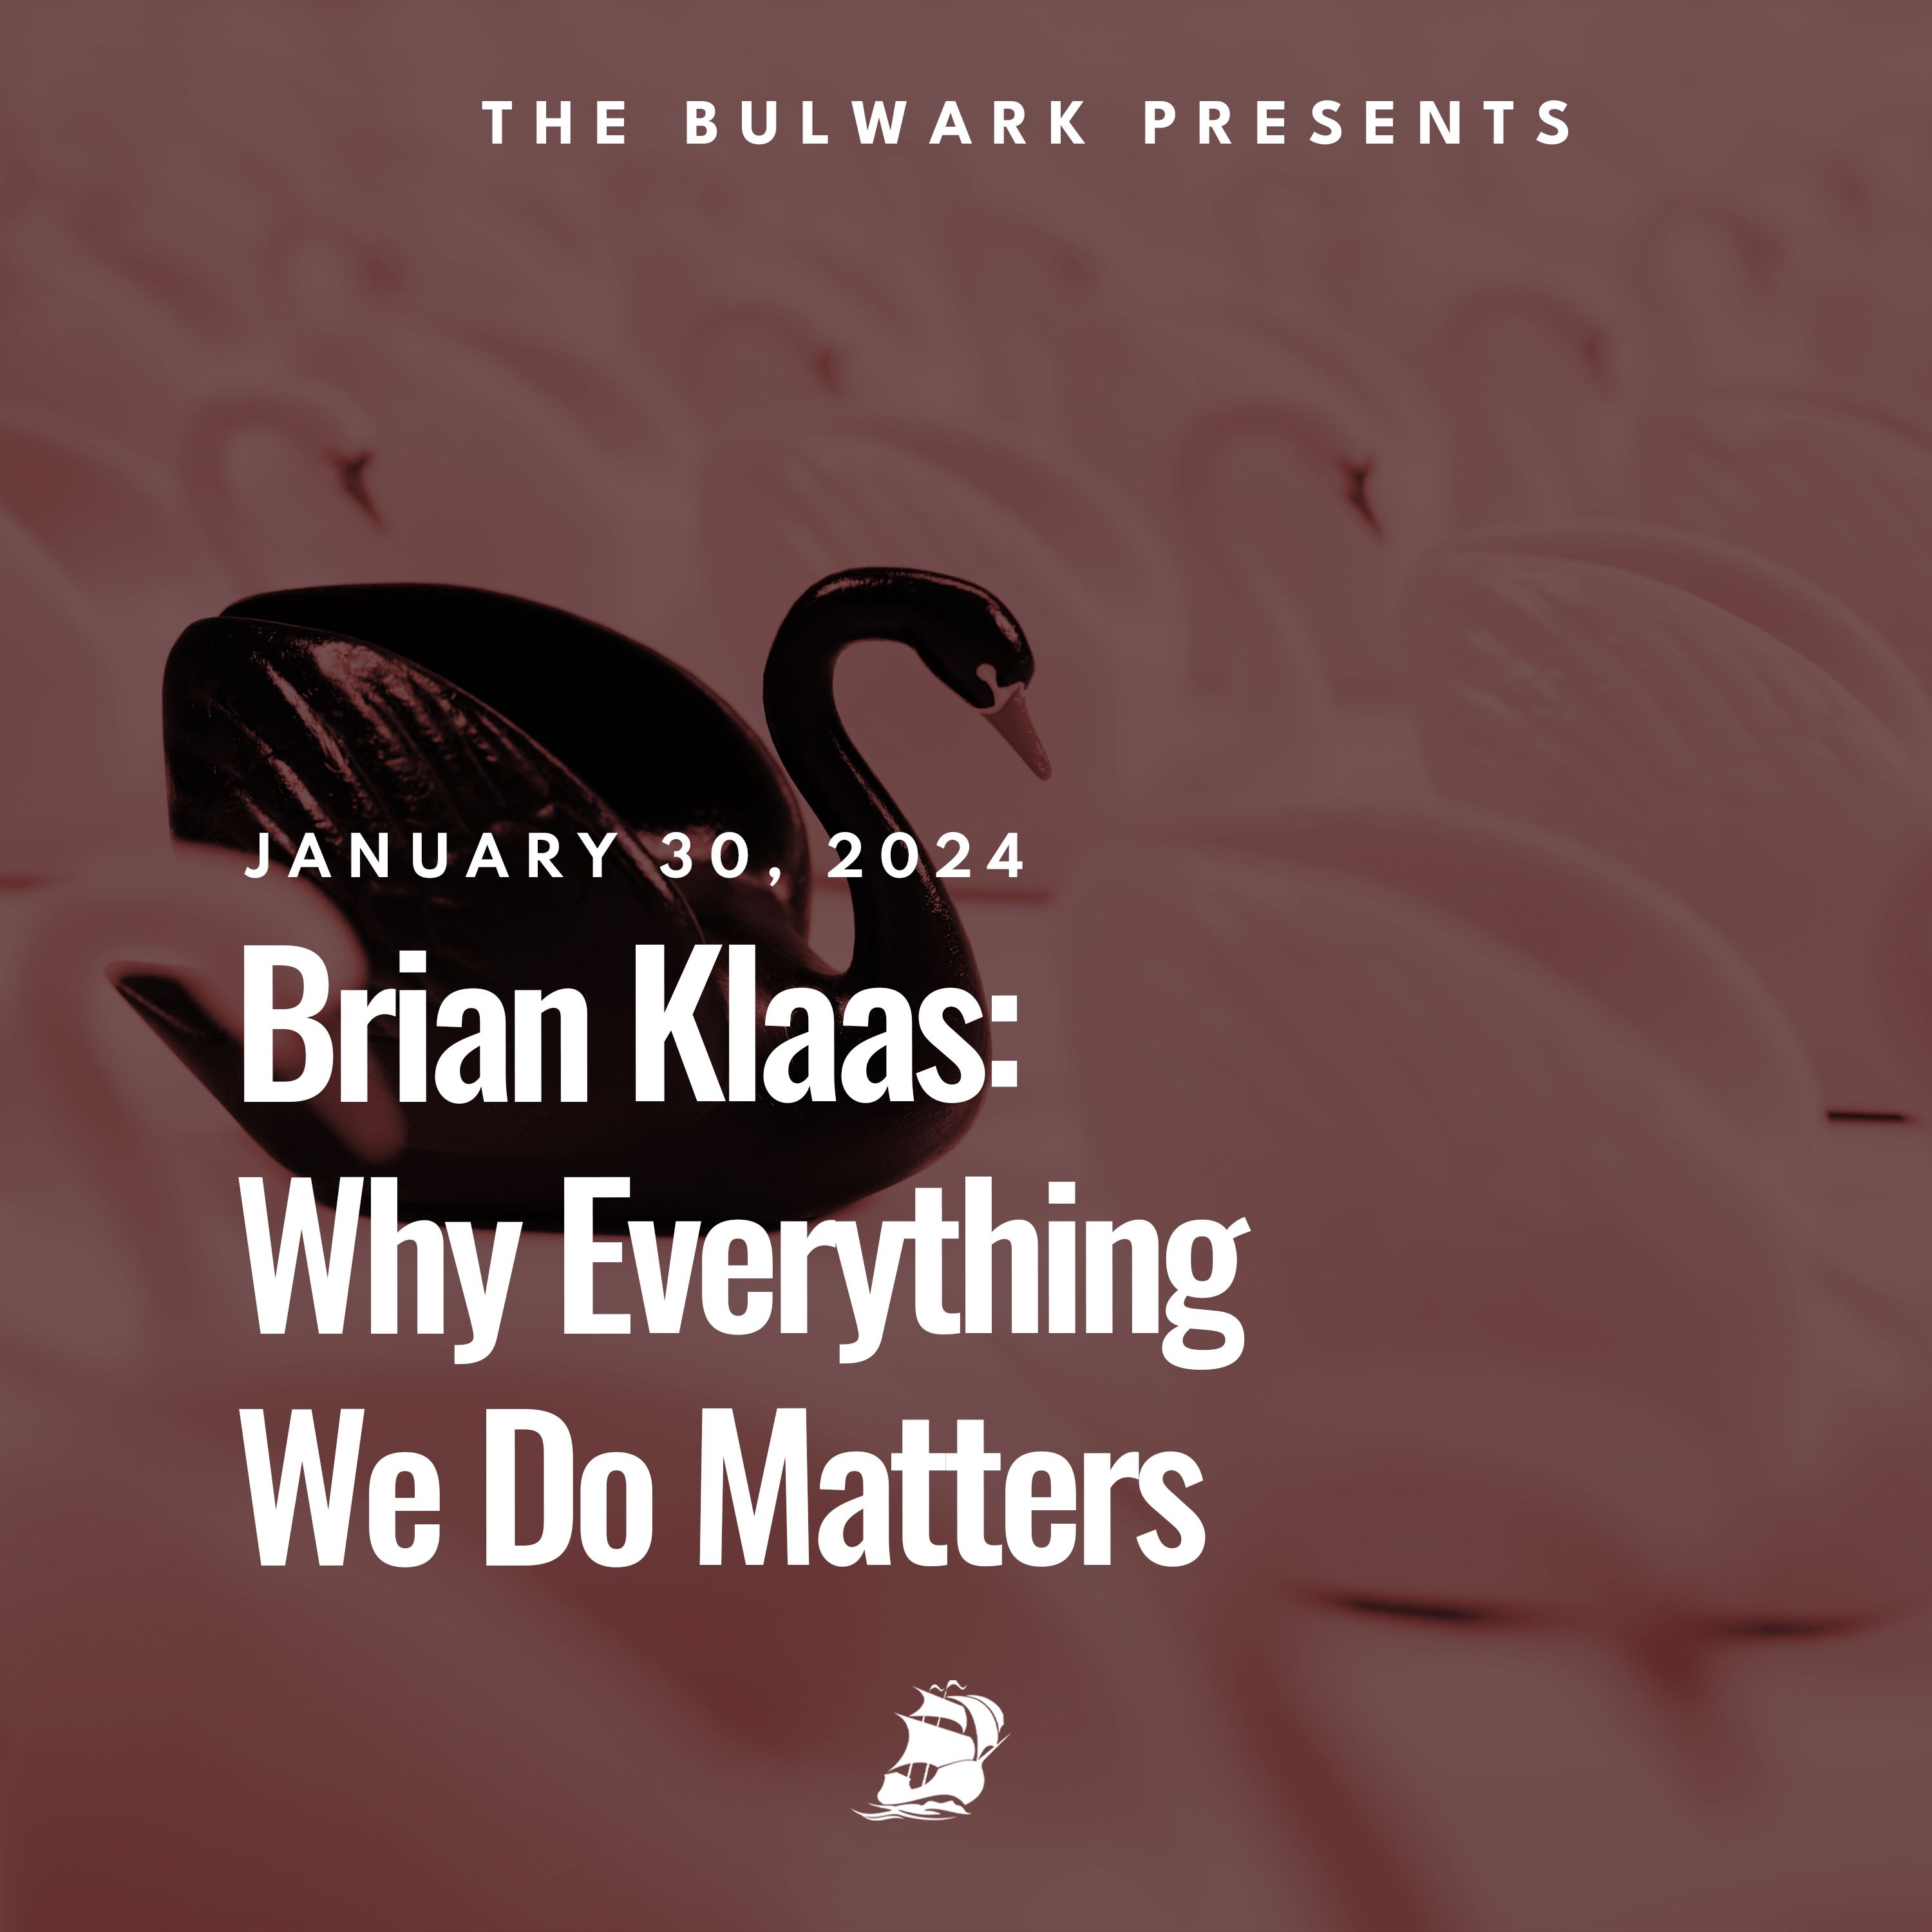 Brian Klaas: Why Everything We Do Matters